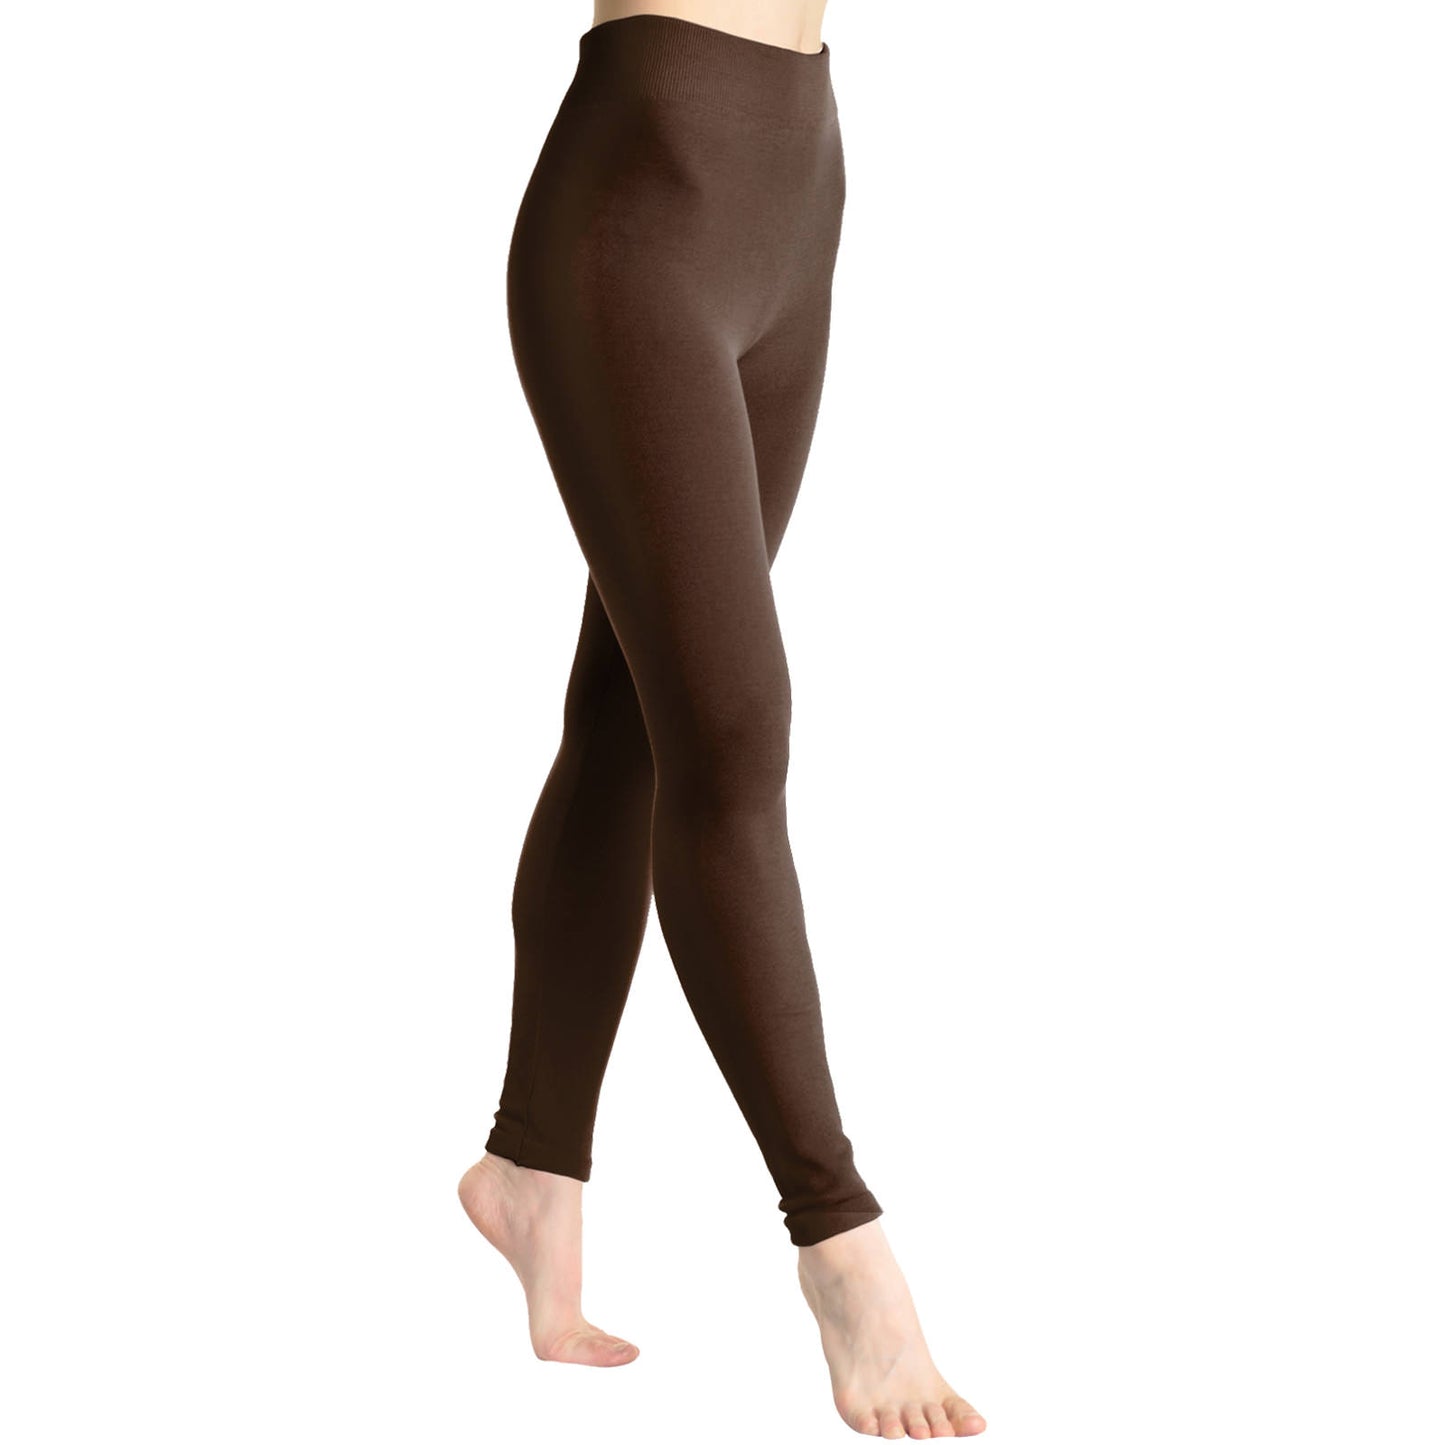 Angelina Seamless Footless Leggings with Winter Warmth Plus Lining (6 or 12 Pack)